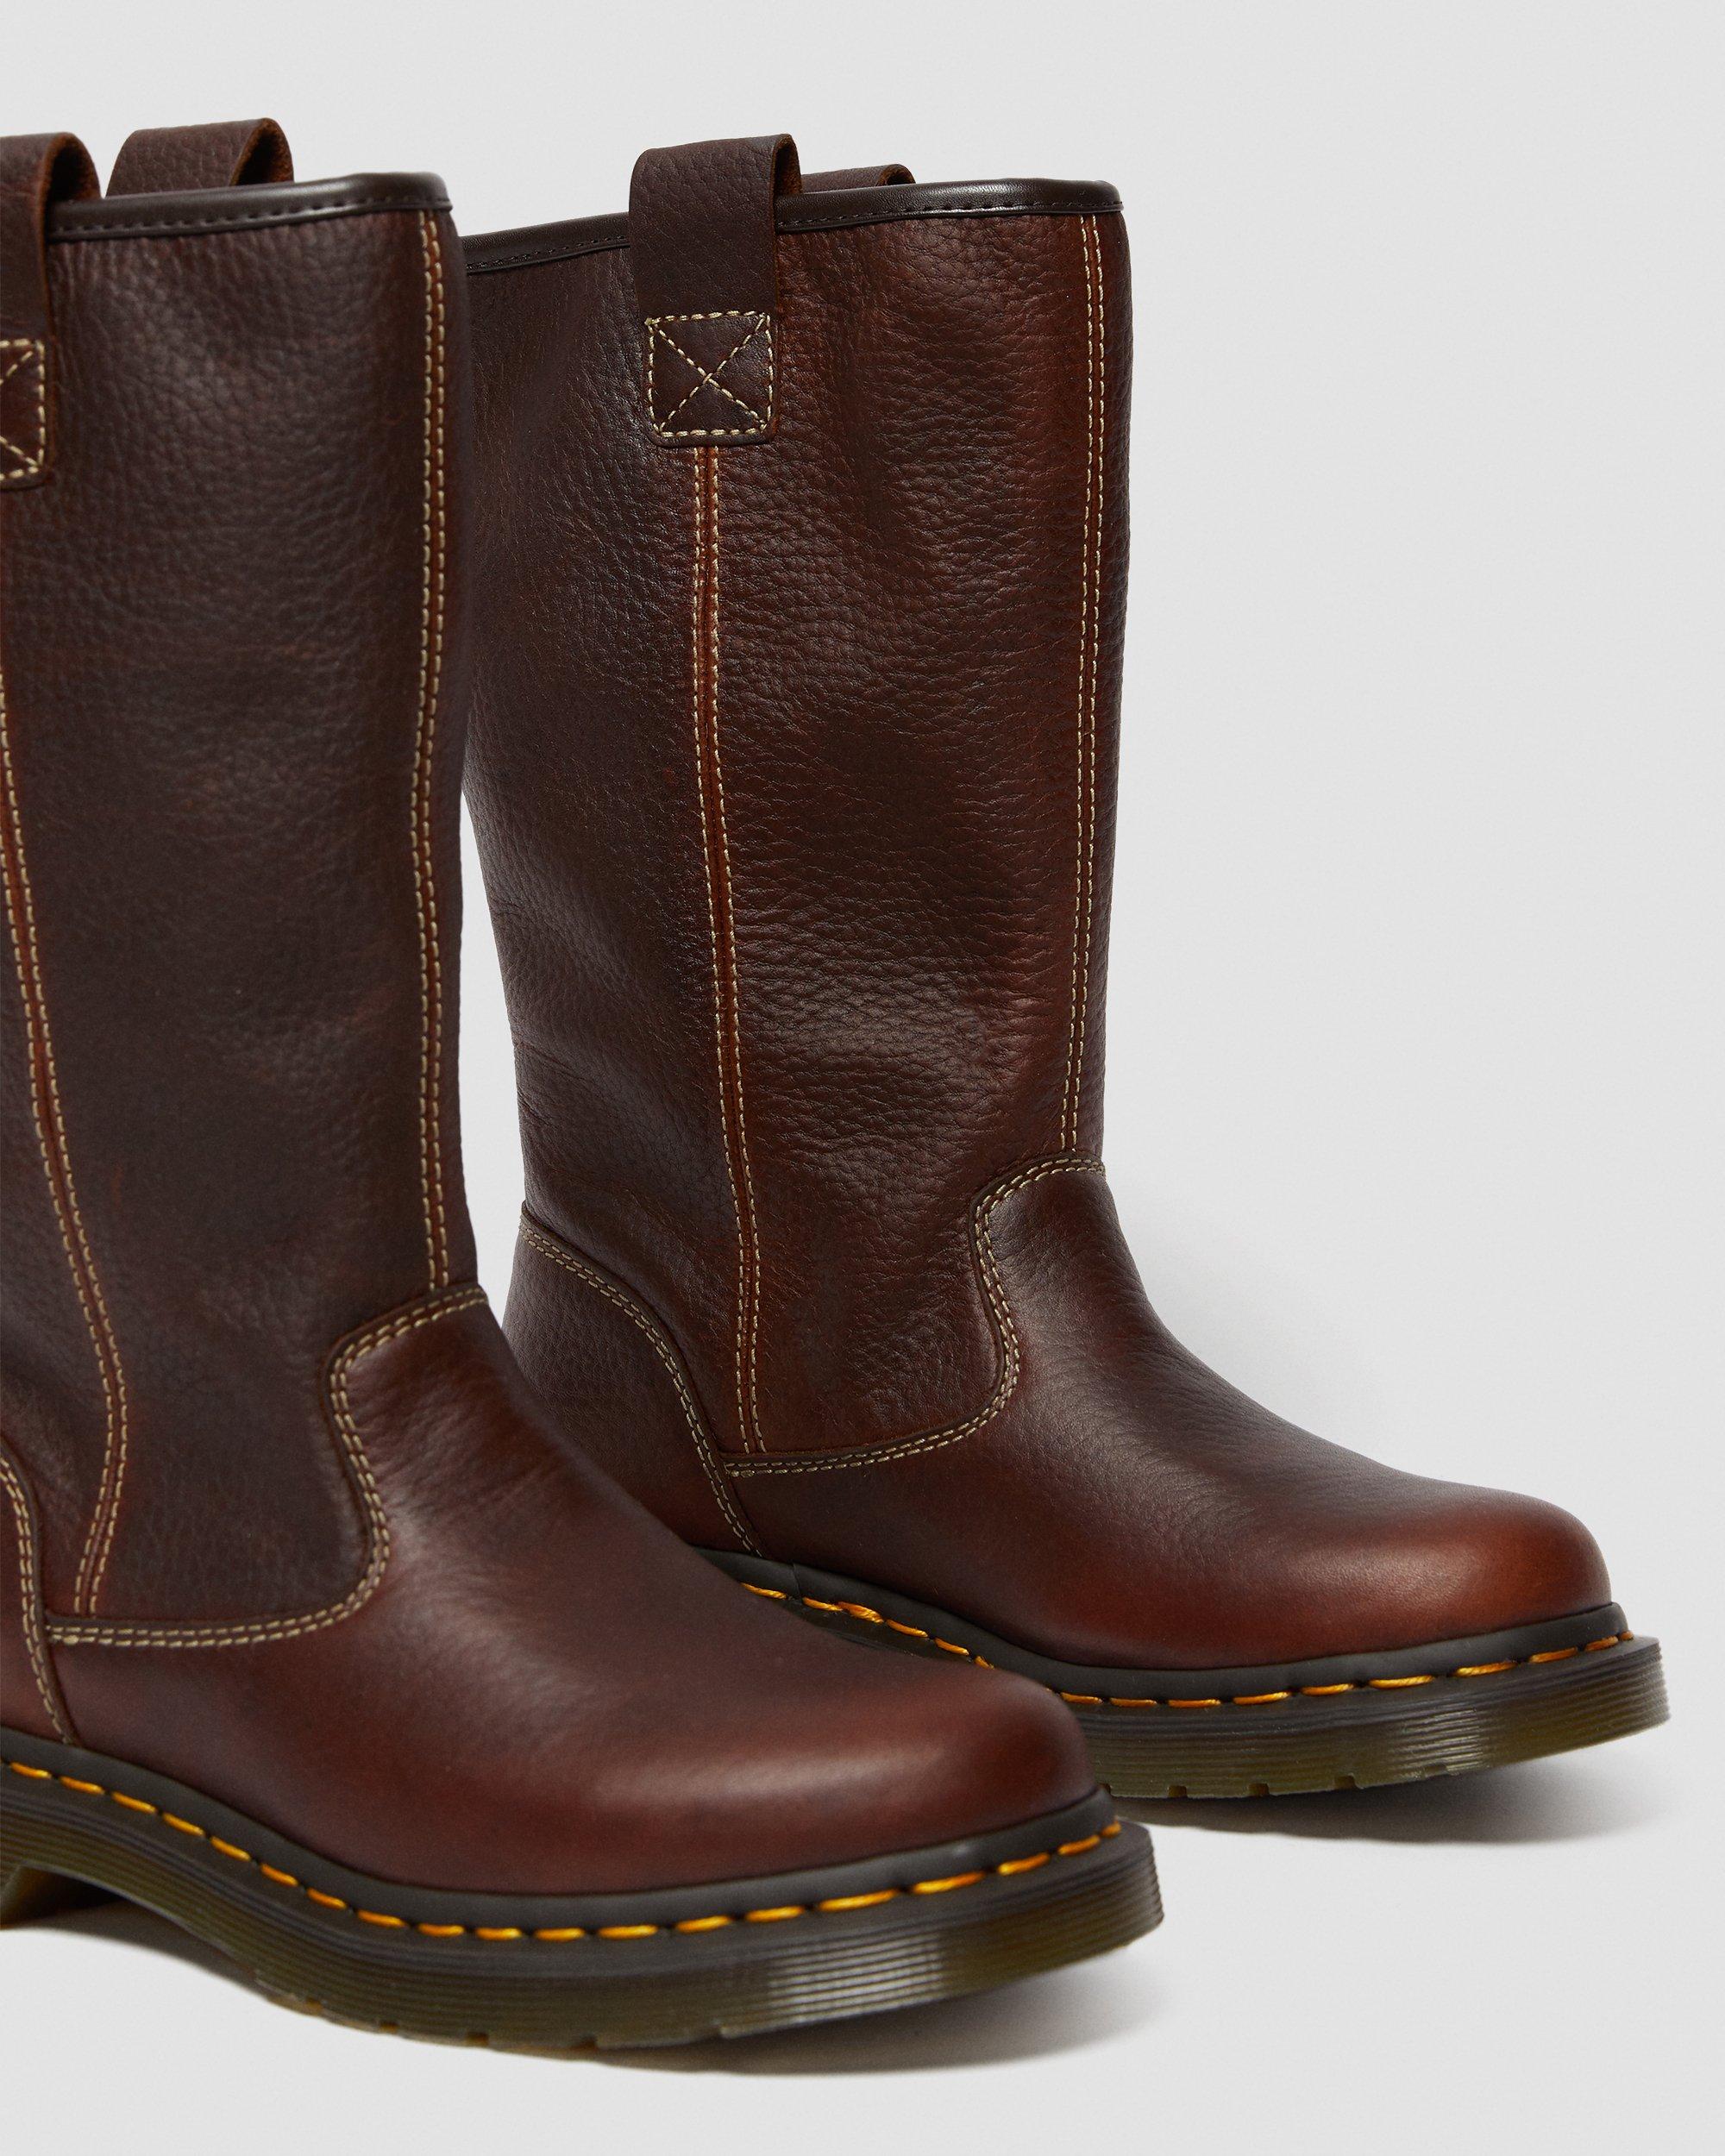 BELSAY WOMEN'S PULL ON WORK BOOTS | Dr 